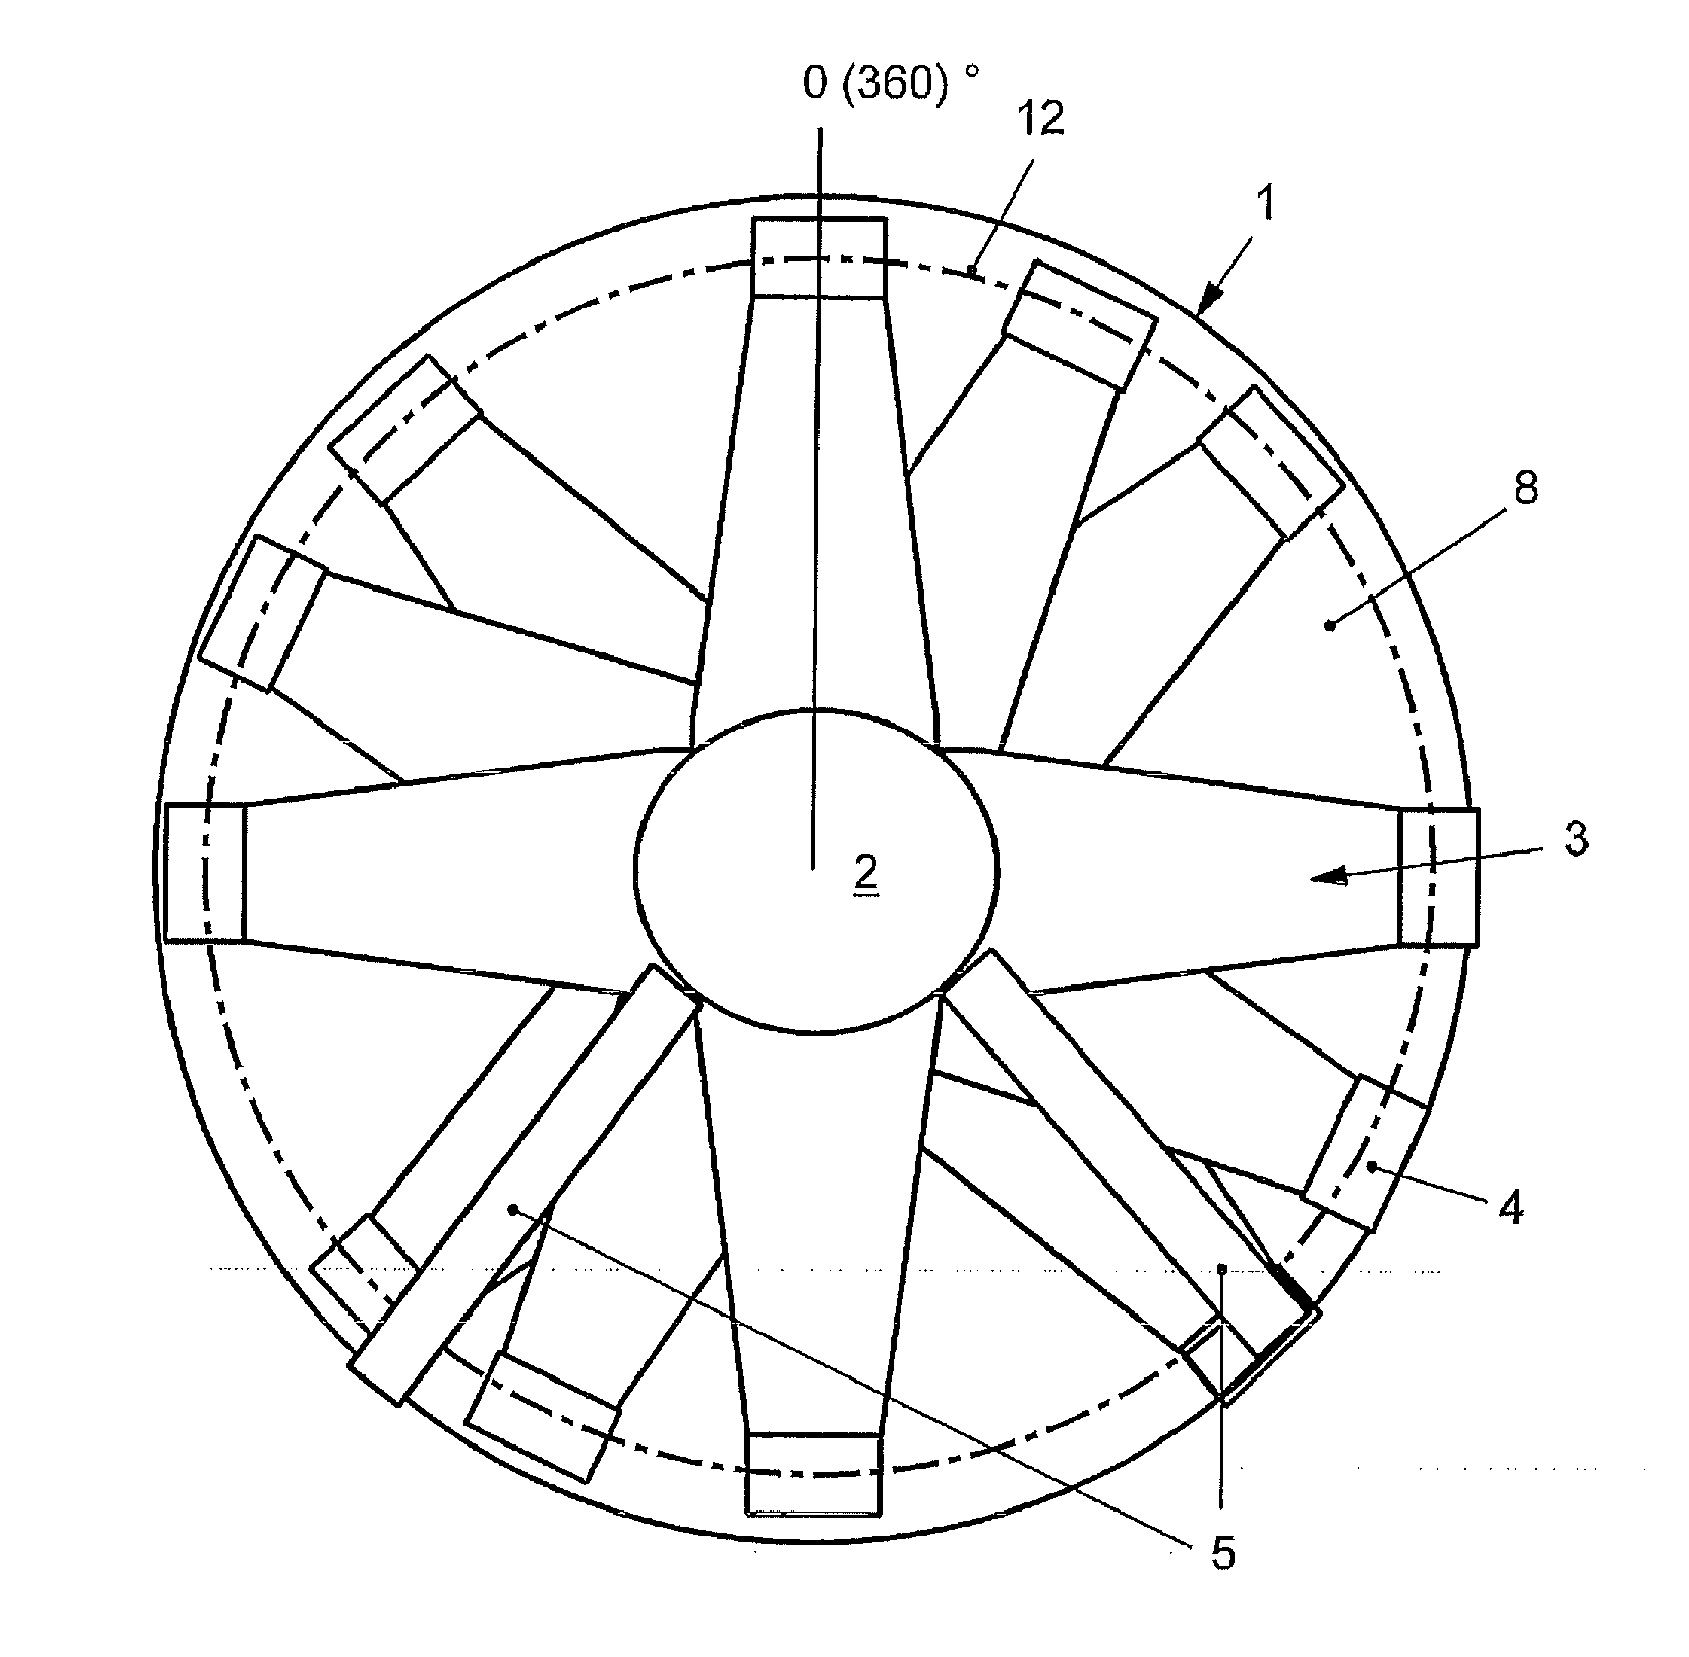 Device for transporting viscous compounds and pastes